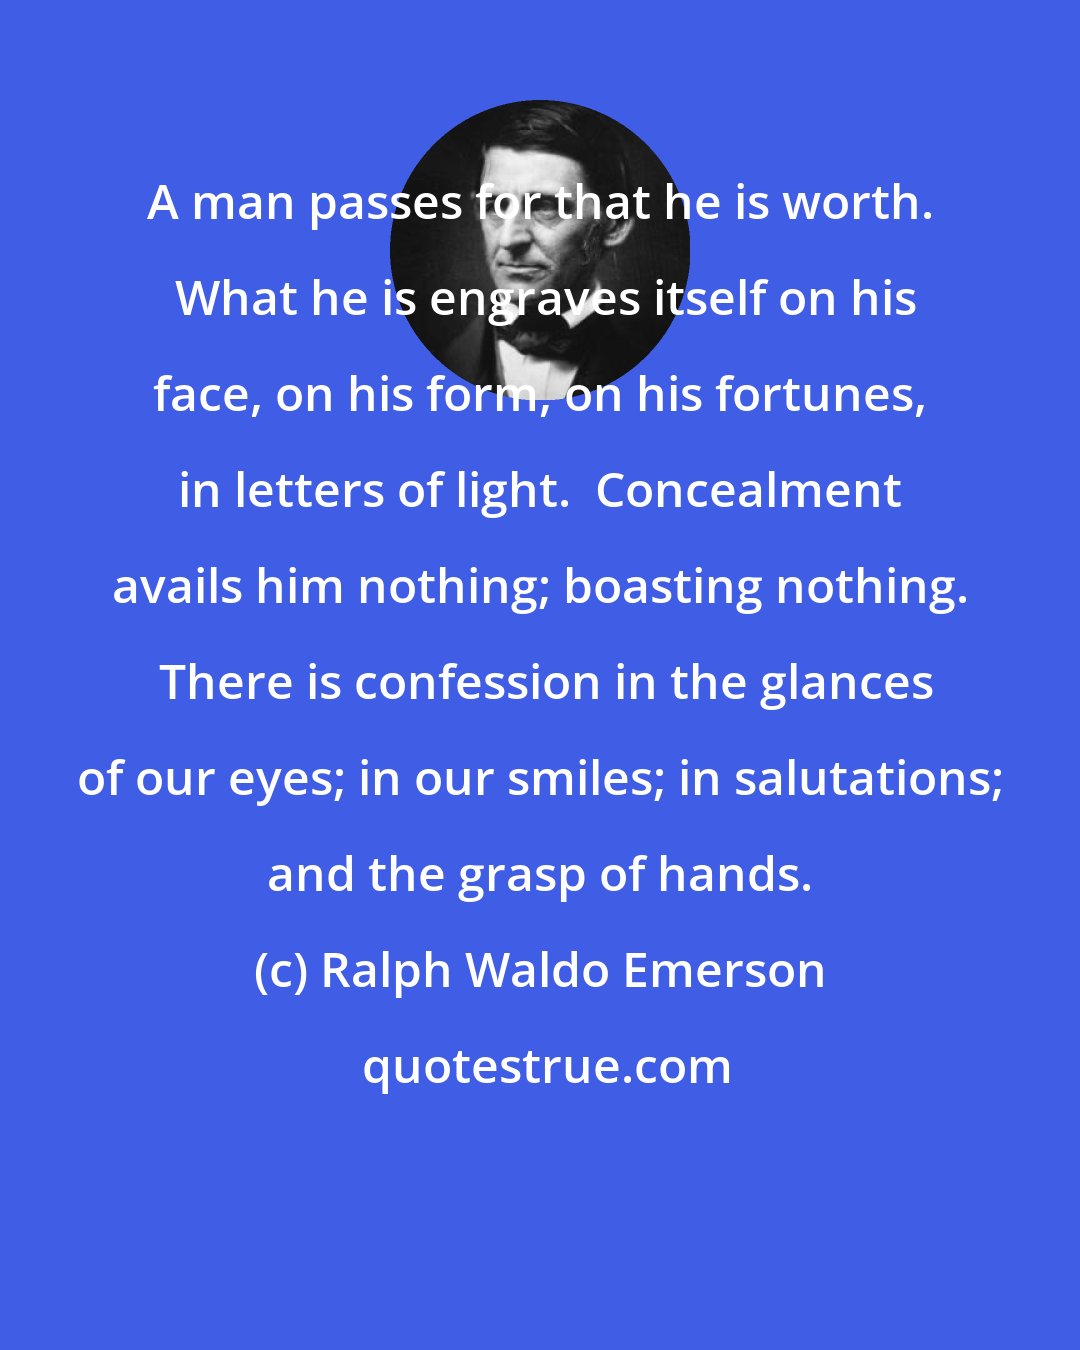 Ralph Waldo Emerson: A man passes for that he is worth.  What he is engraves itself on his face, on his form, on his fortunes, in letters of light.  Concealment avails him nothing; boasting nothing.  There is confession in the glances of our eyes; in our smiles; in salutations; and the grasp of hands.